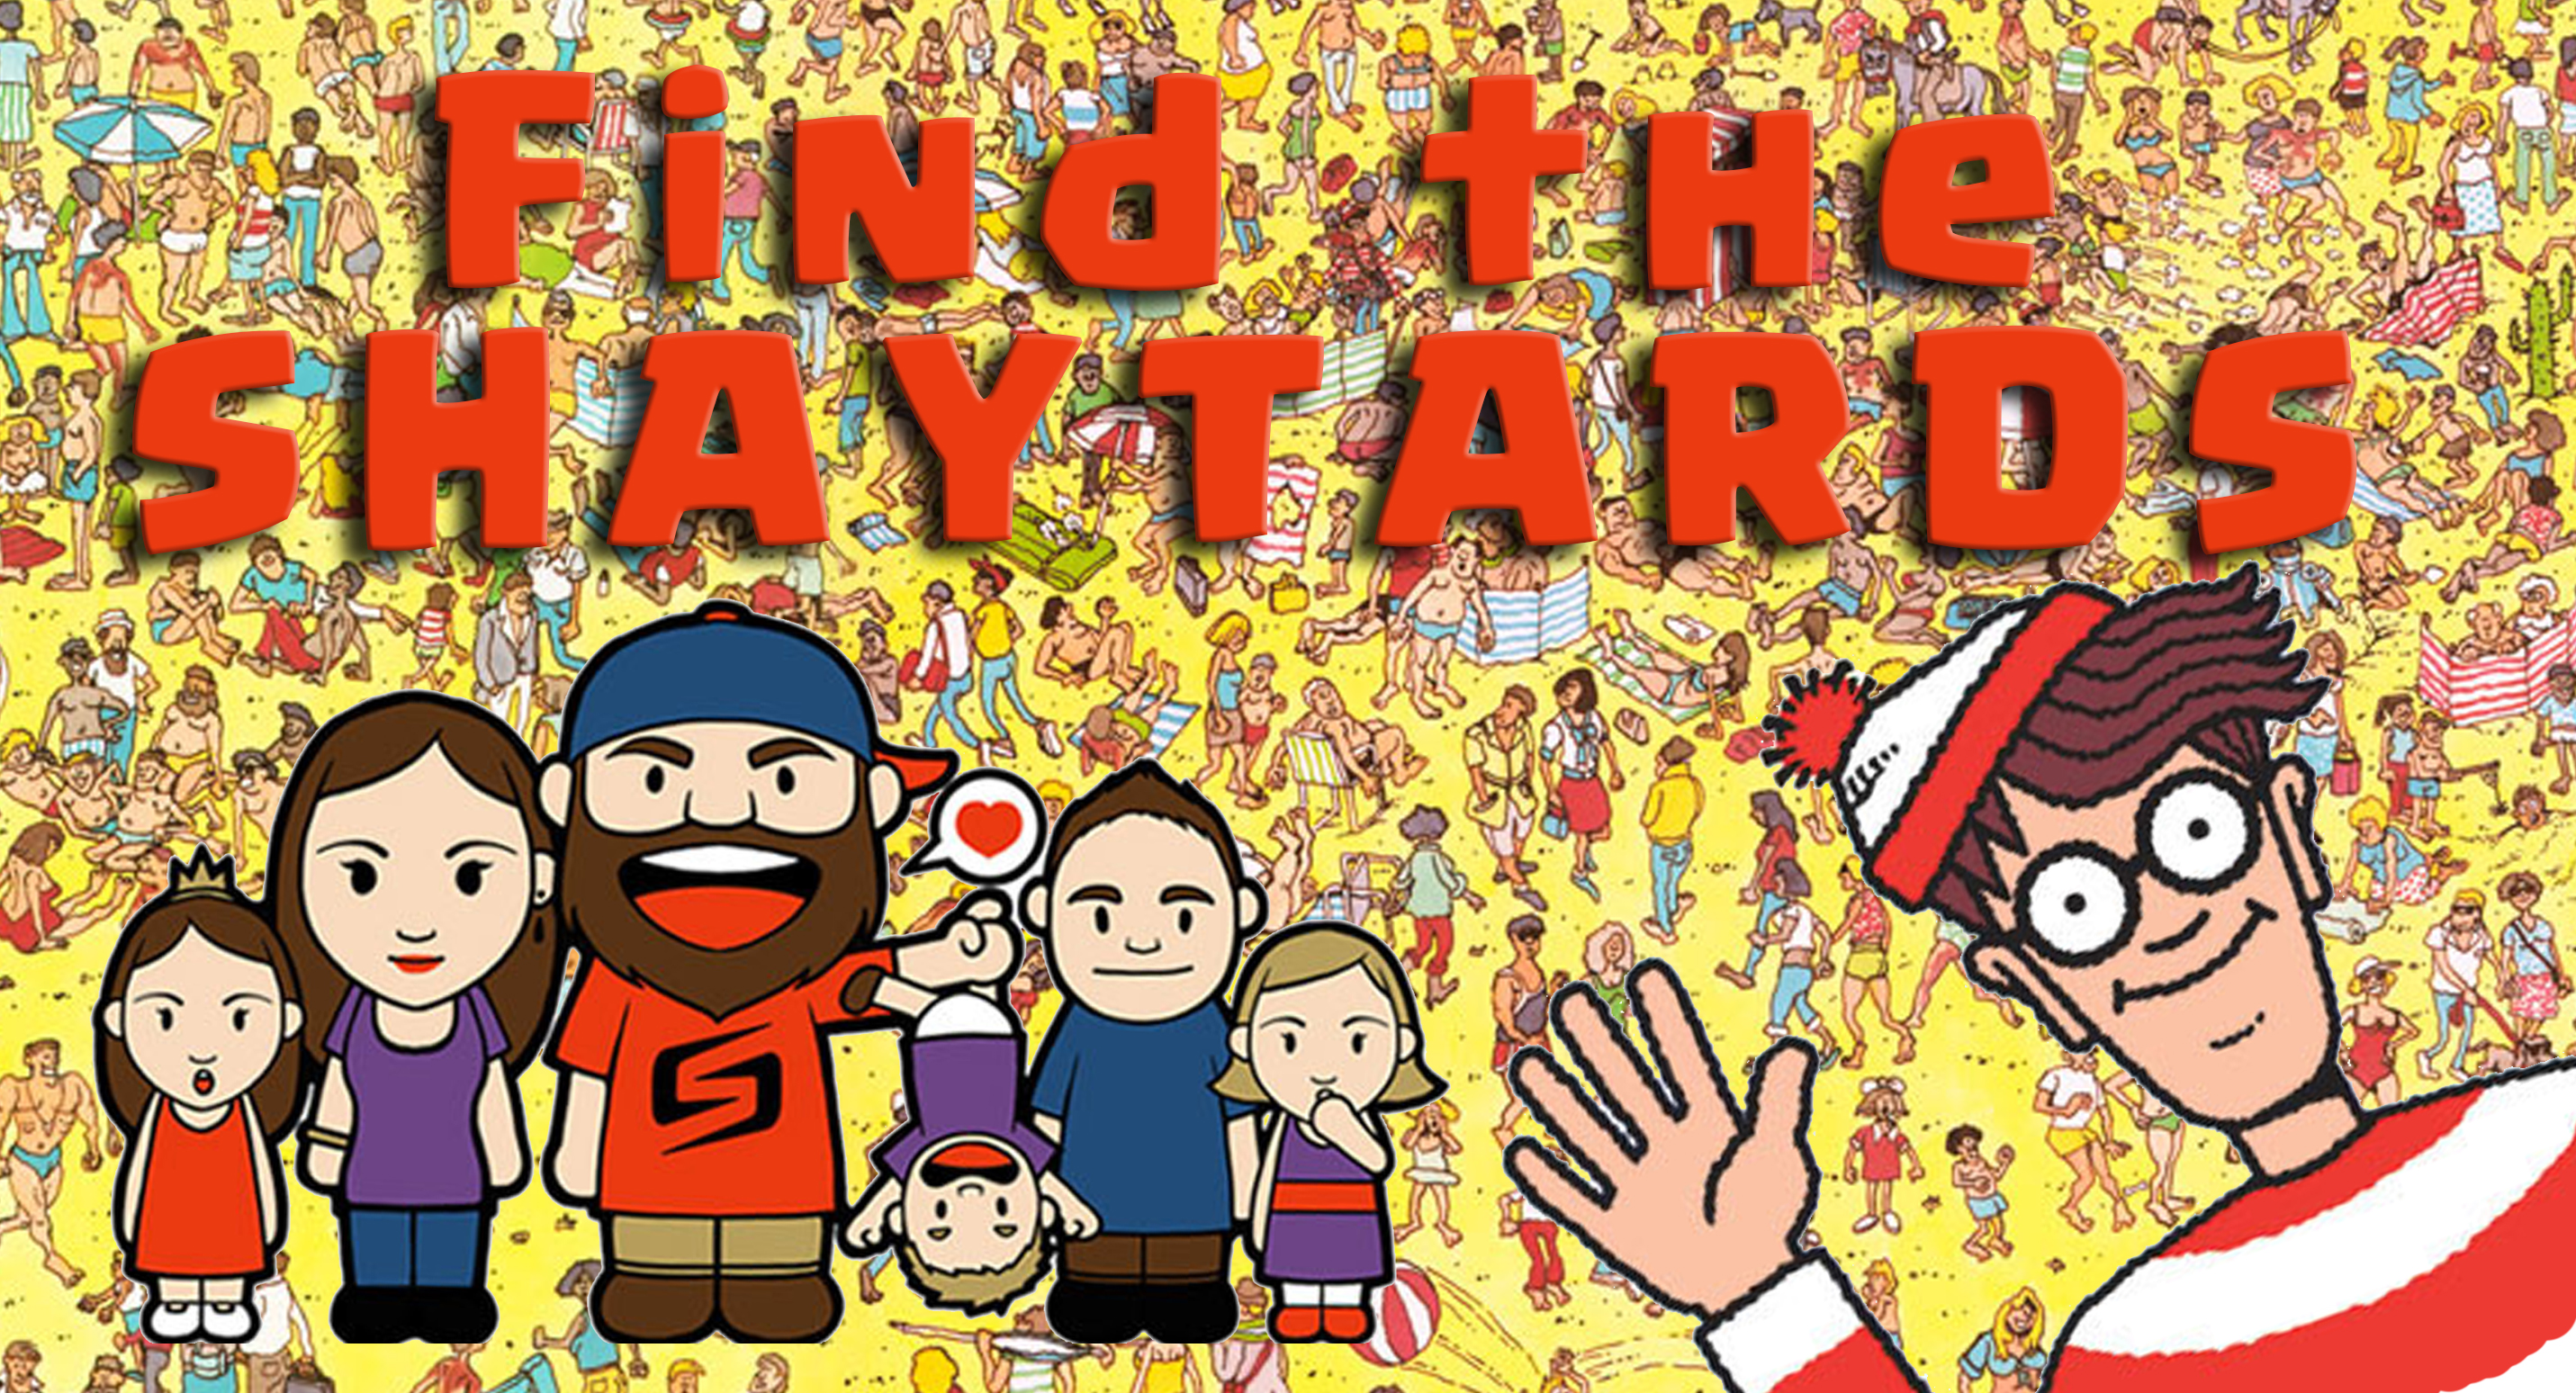 Can You Find The Shaytards?